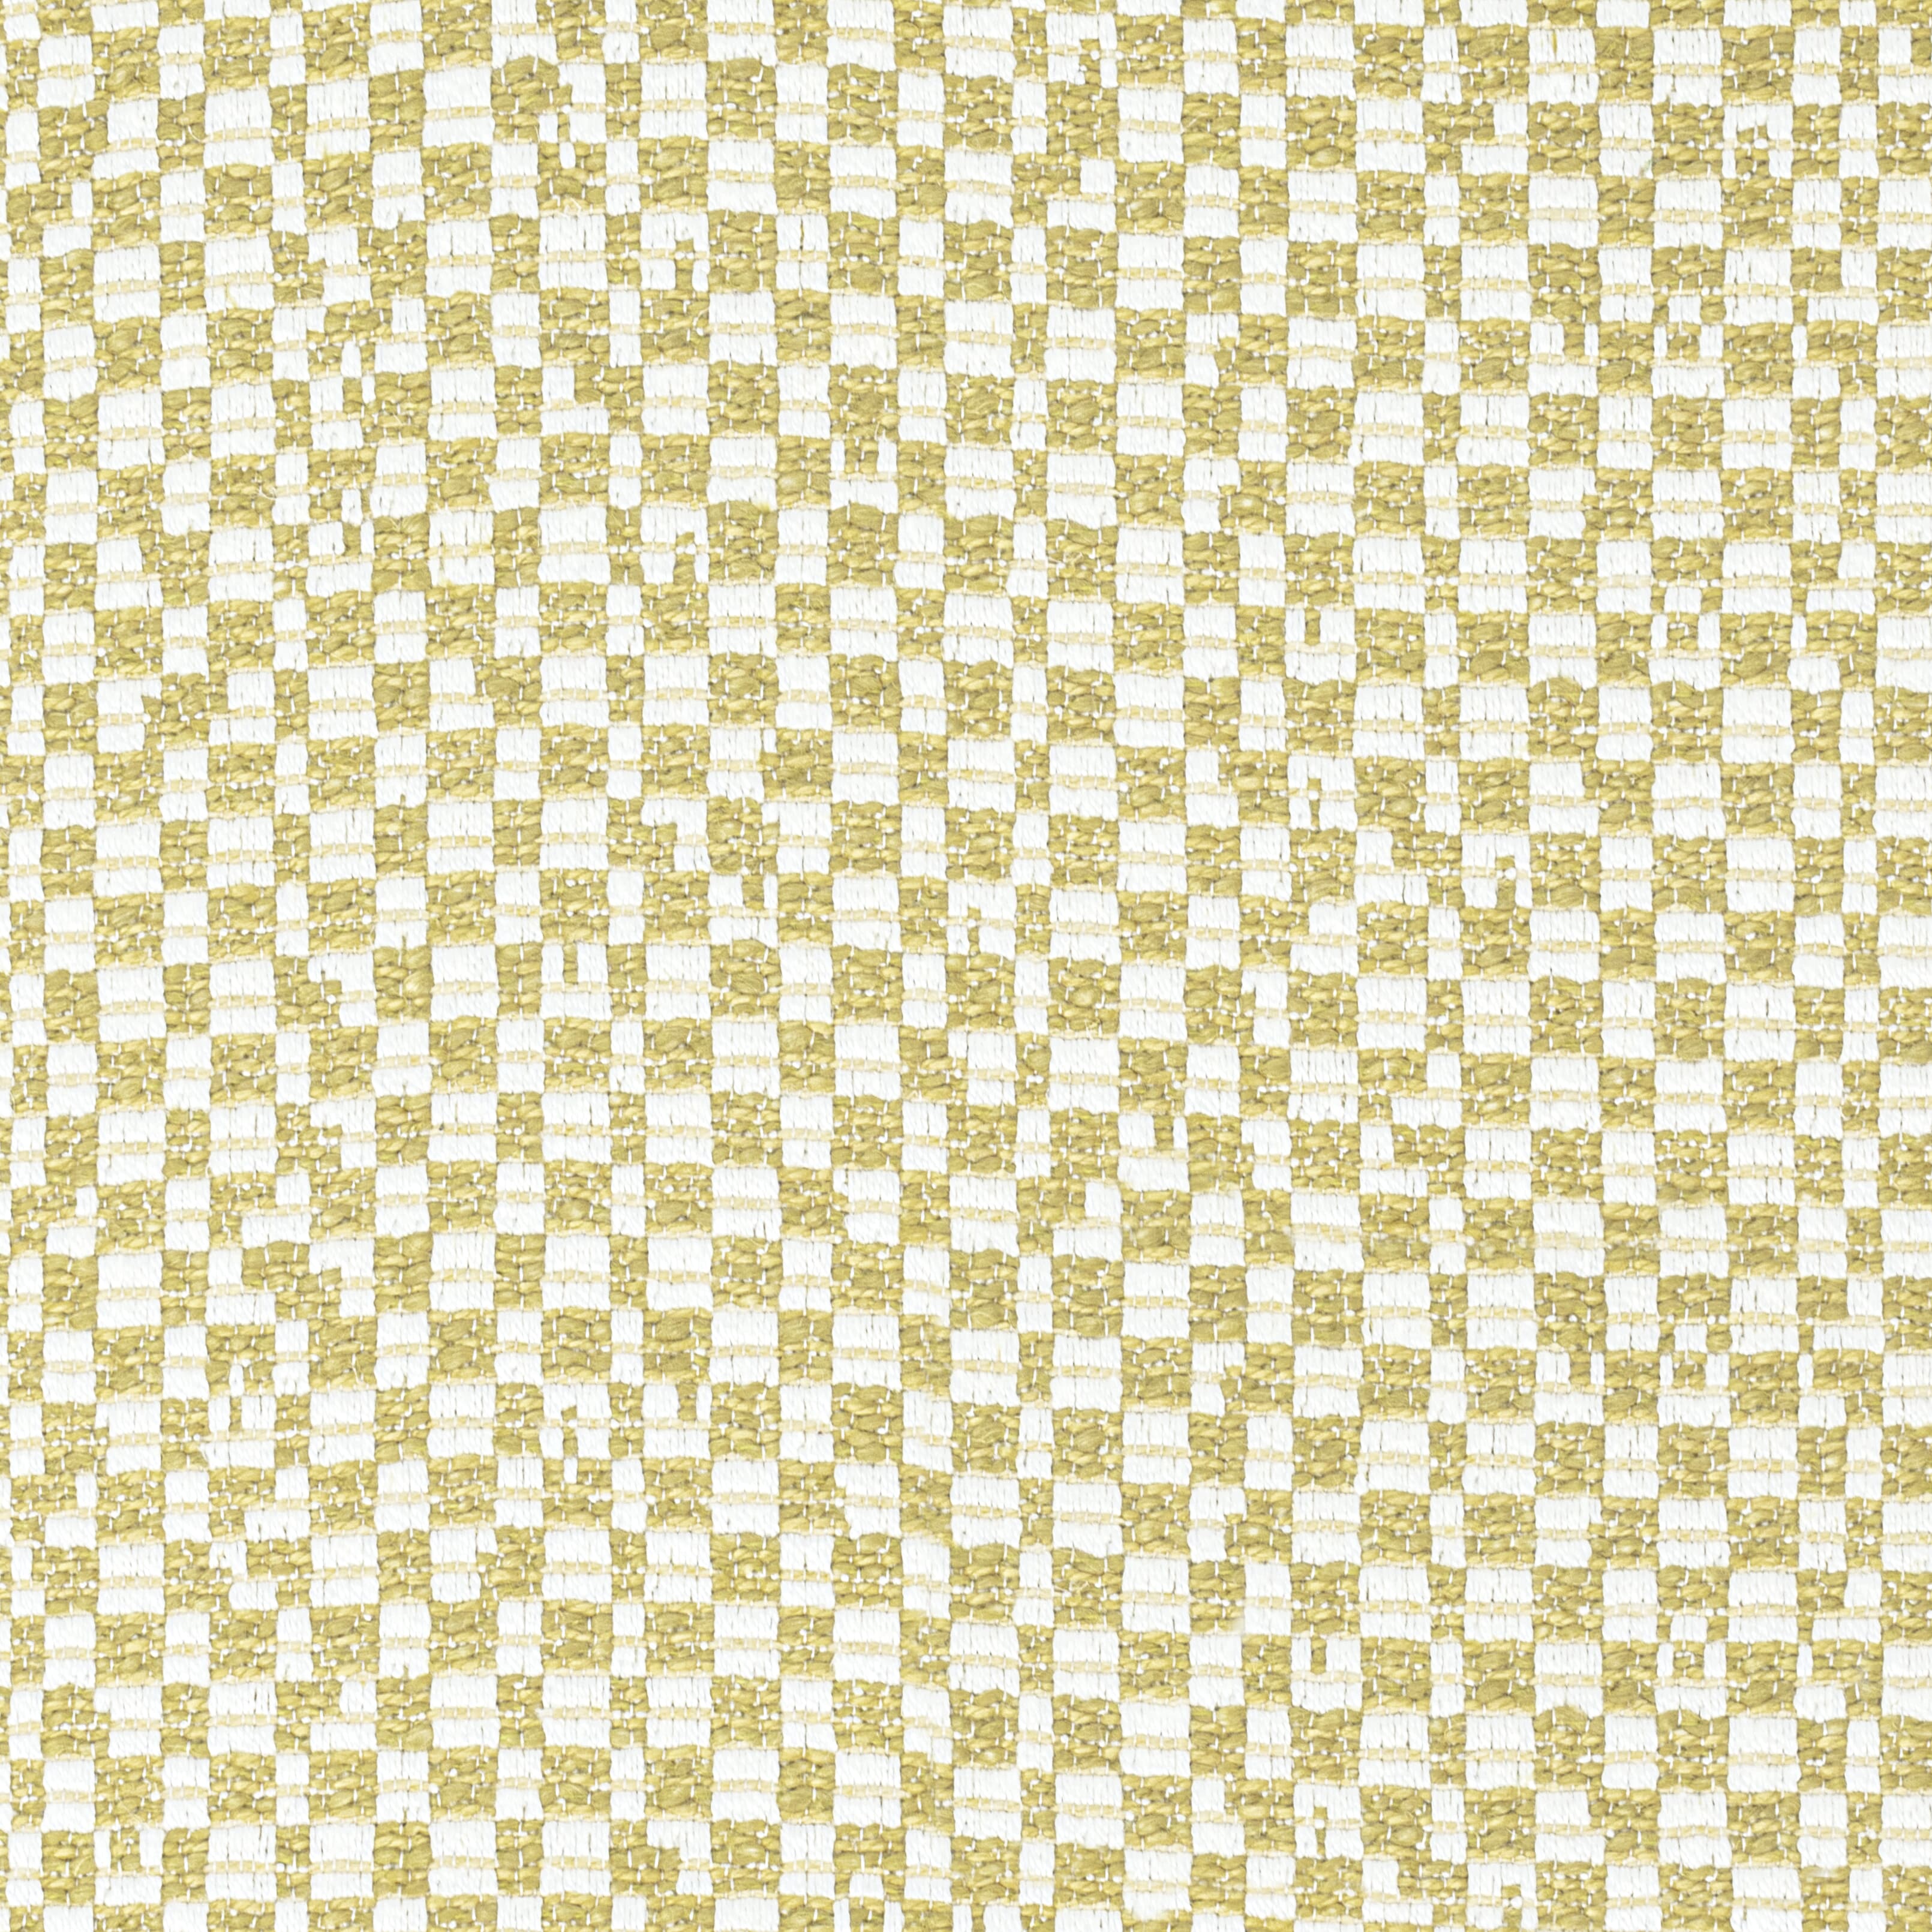 7803-9 Foundation Glow by Stout Fabric